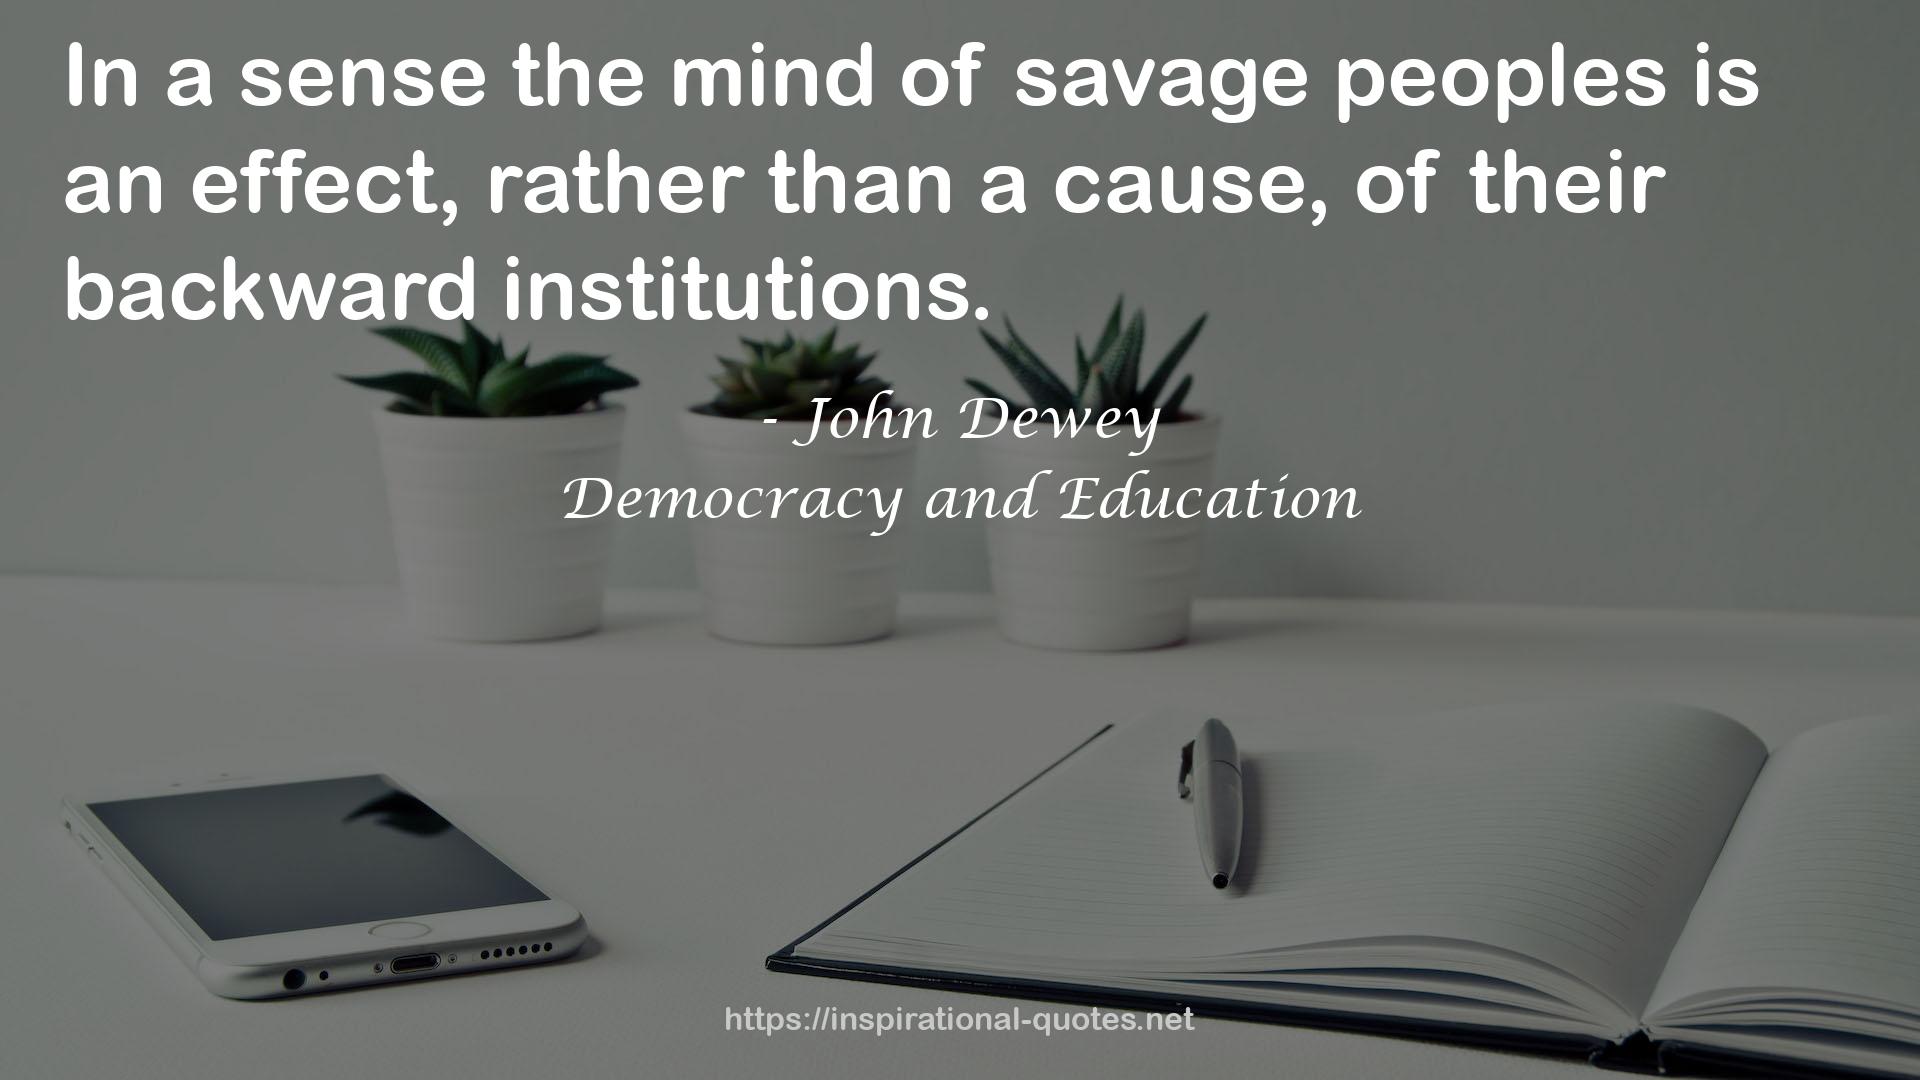 Democracy and Education QUOTES